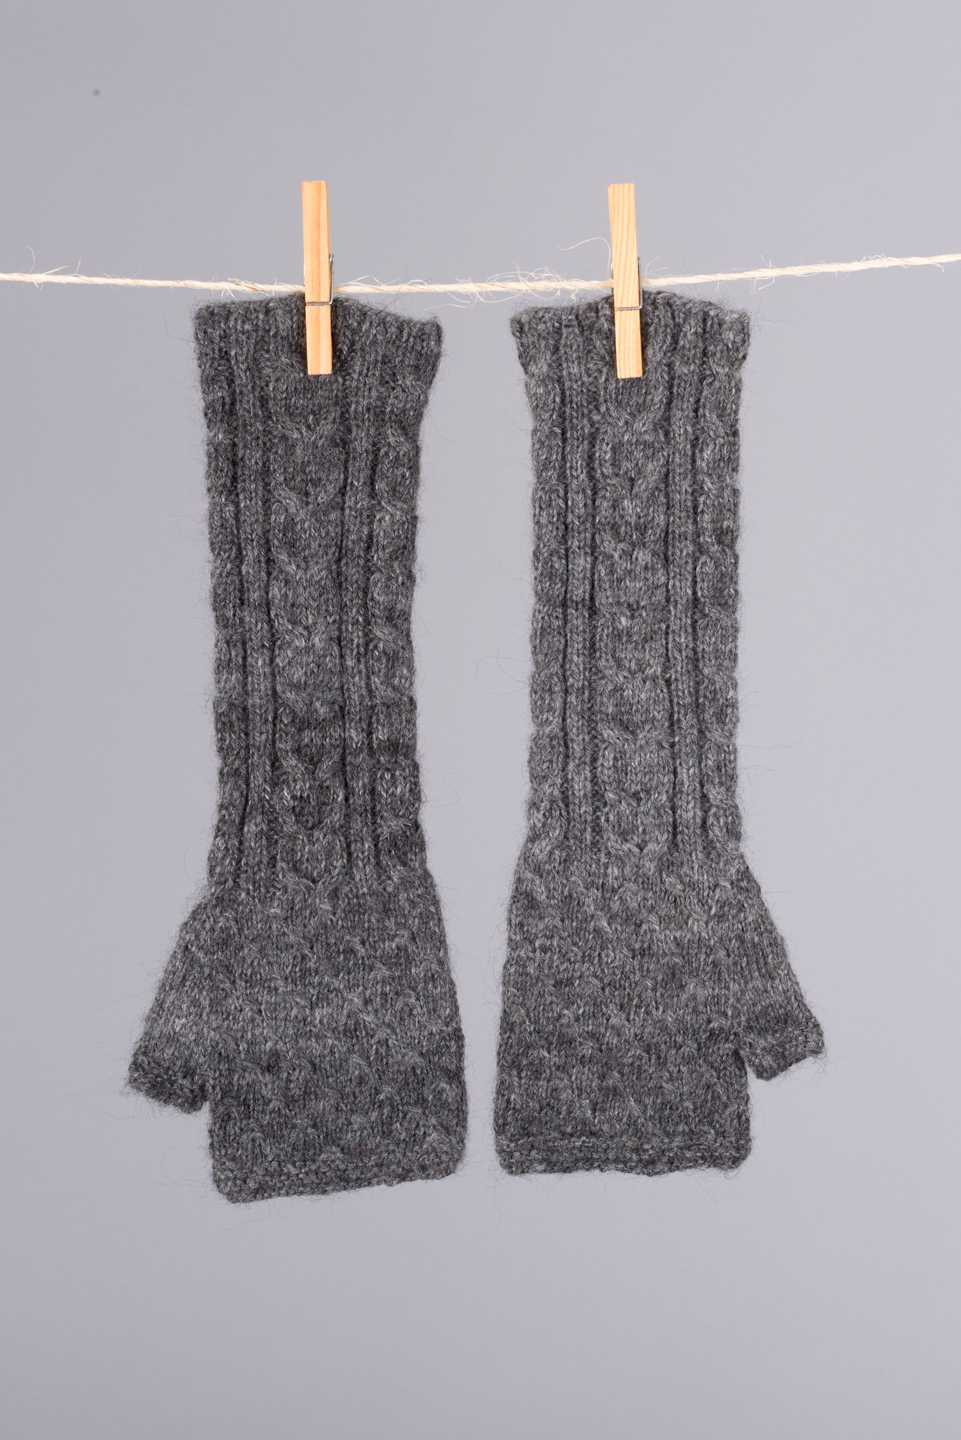 mitaines longues sans doigt / long fingerless mittens